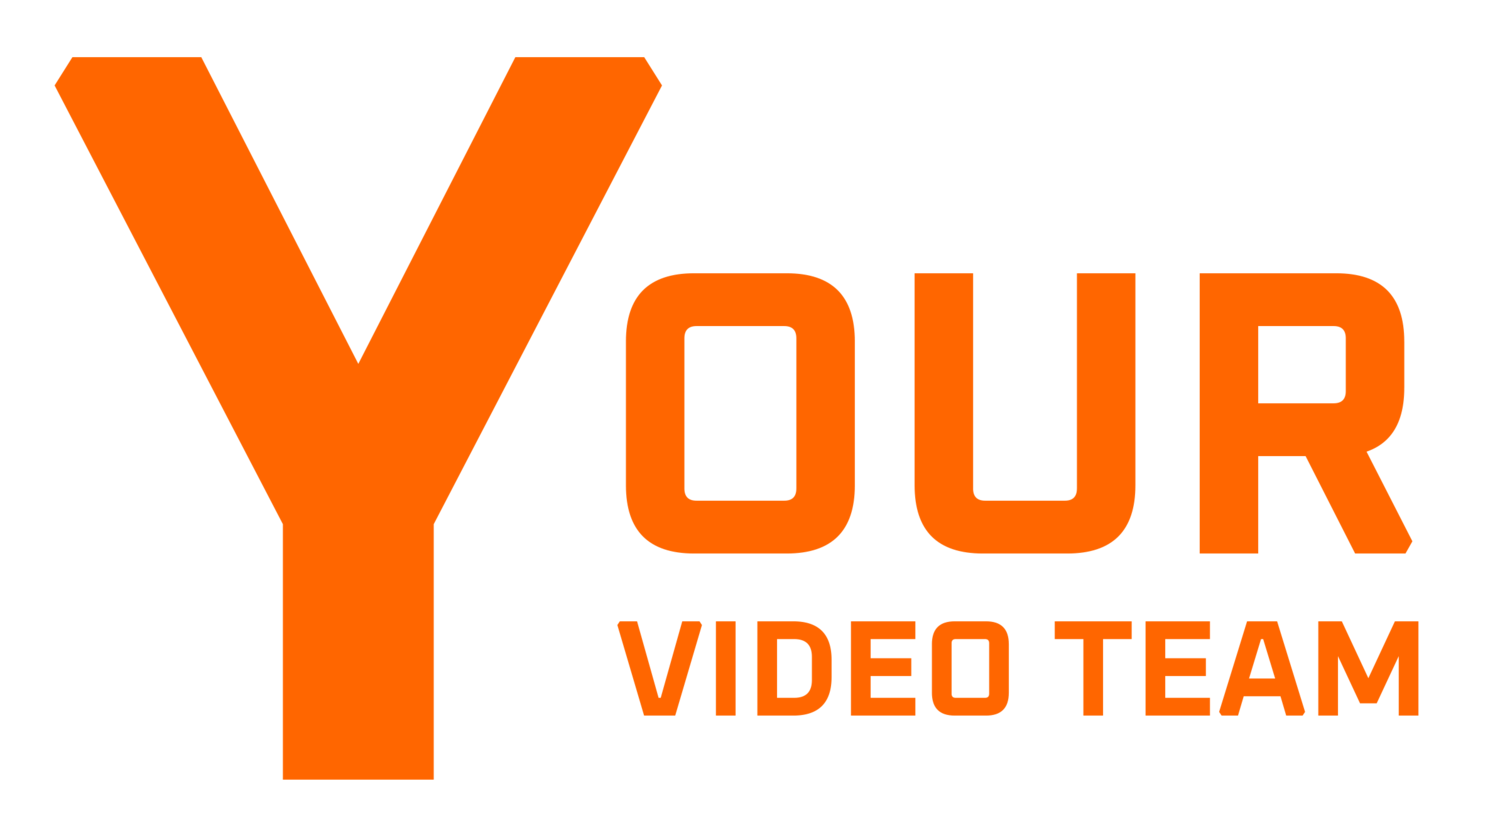 Your Video Team